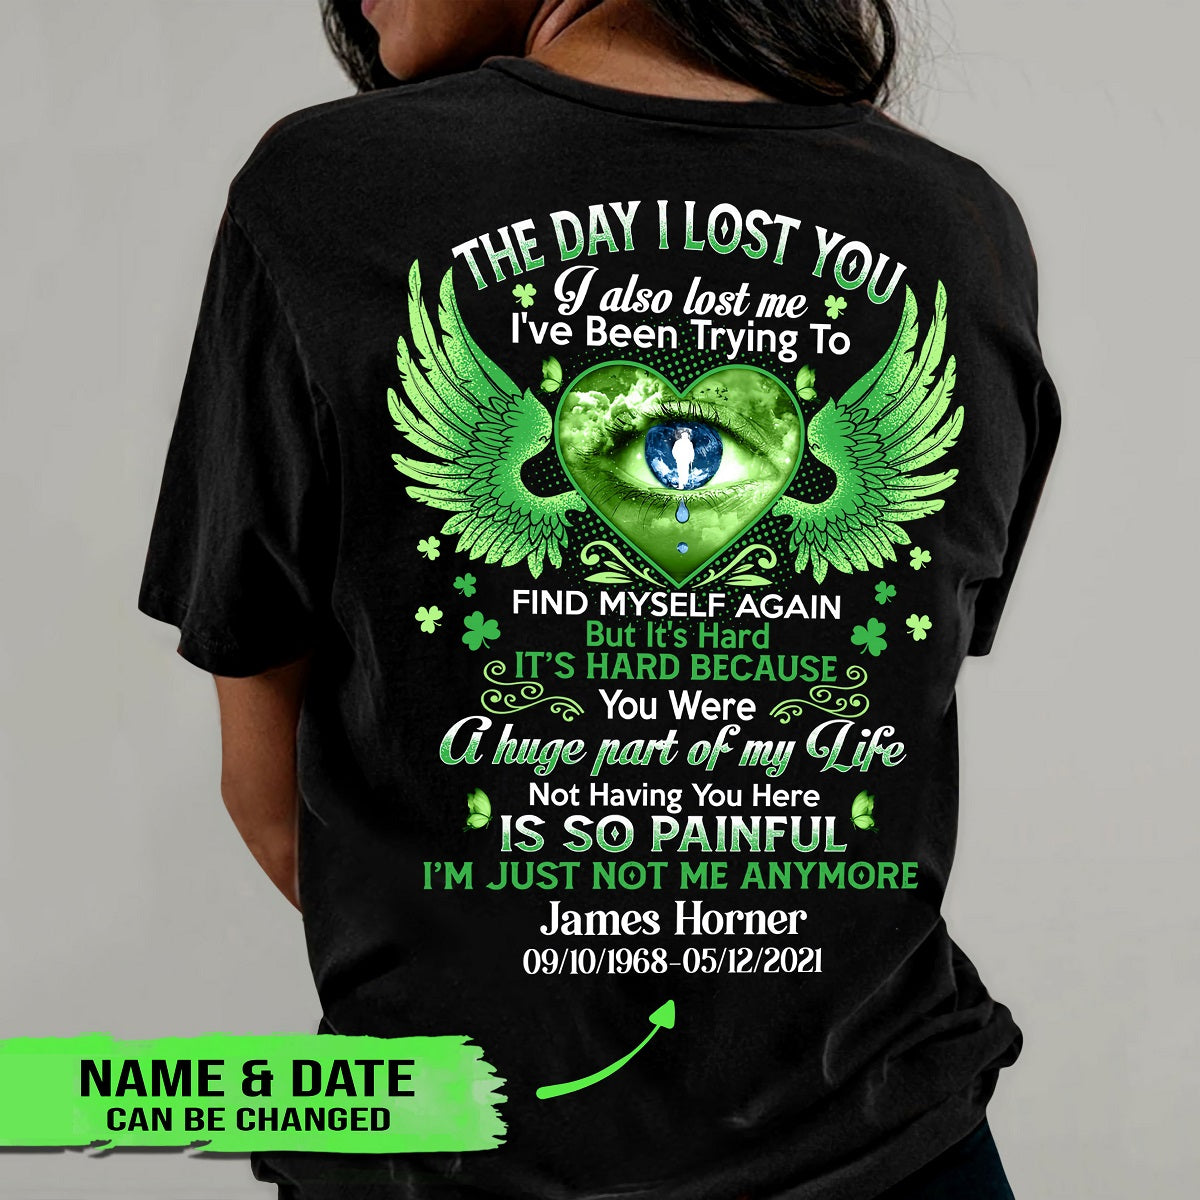 The Day I Lost You - Personalized Custom T-shirt